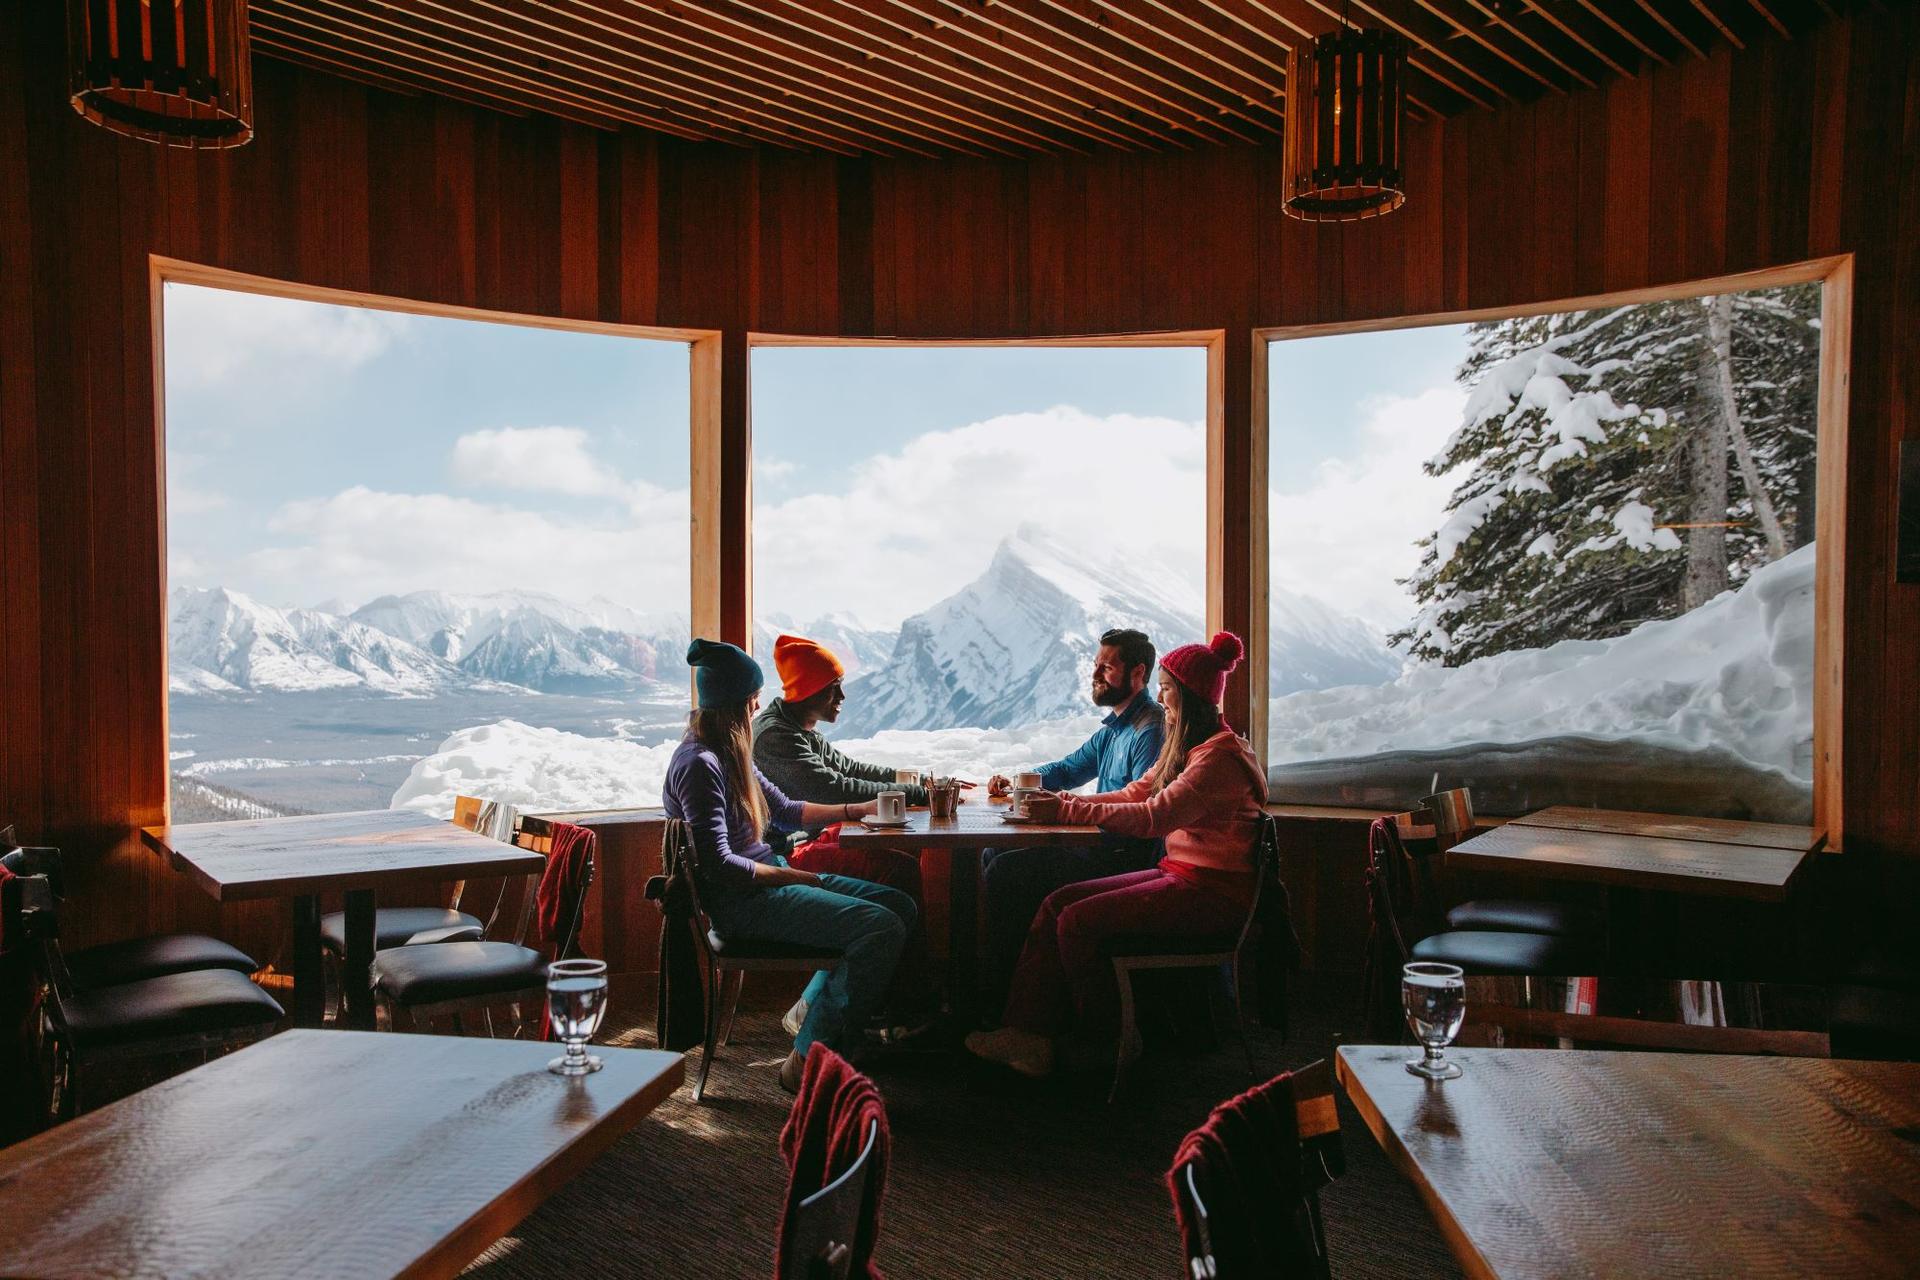 Four people share a table in a ski chalet